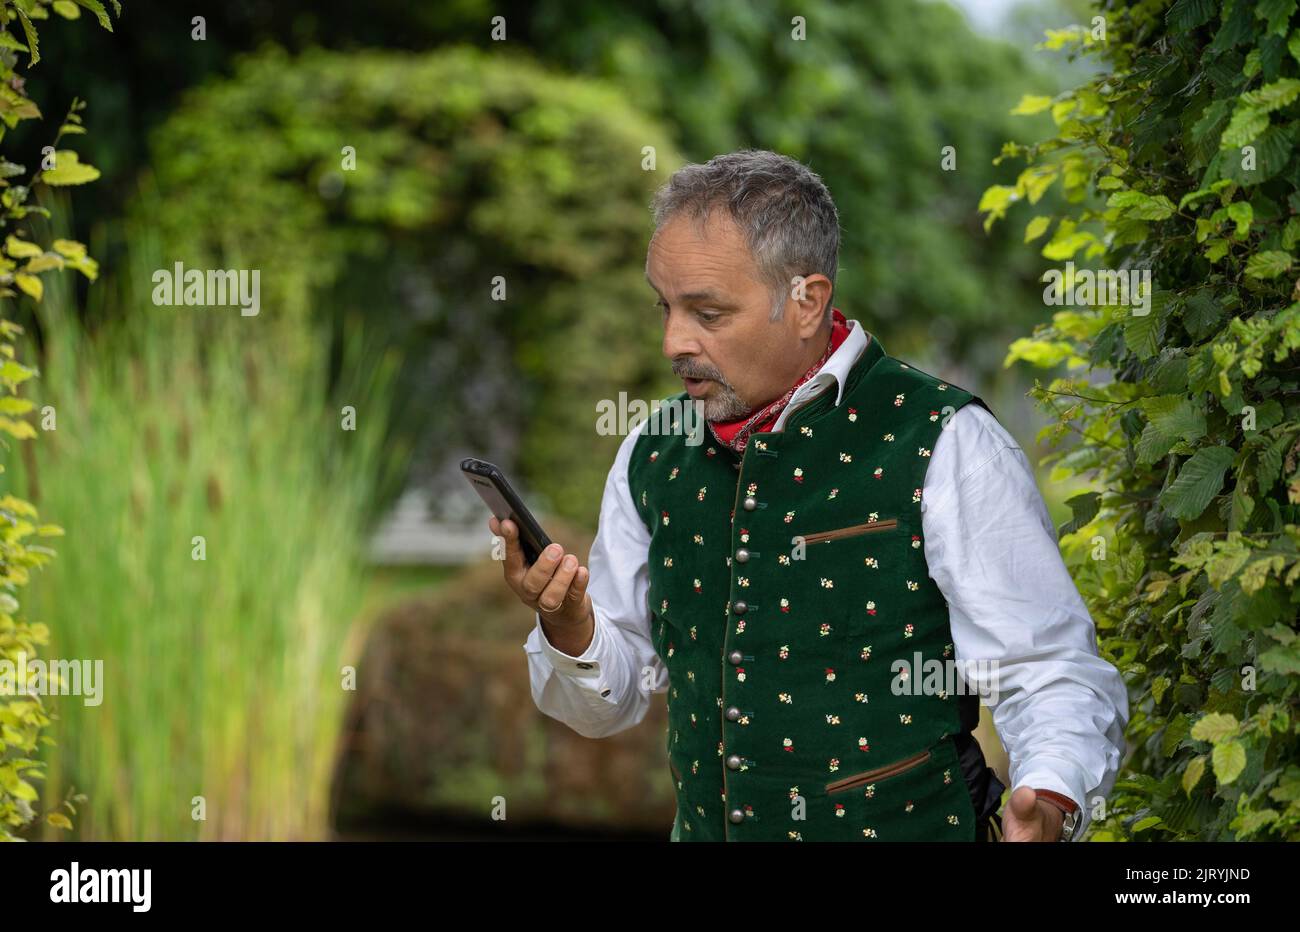 Middle-aged man looking confused at his phone, Karlsruhe, Germany Stock Photo